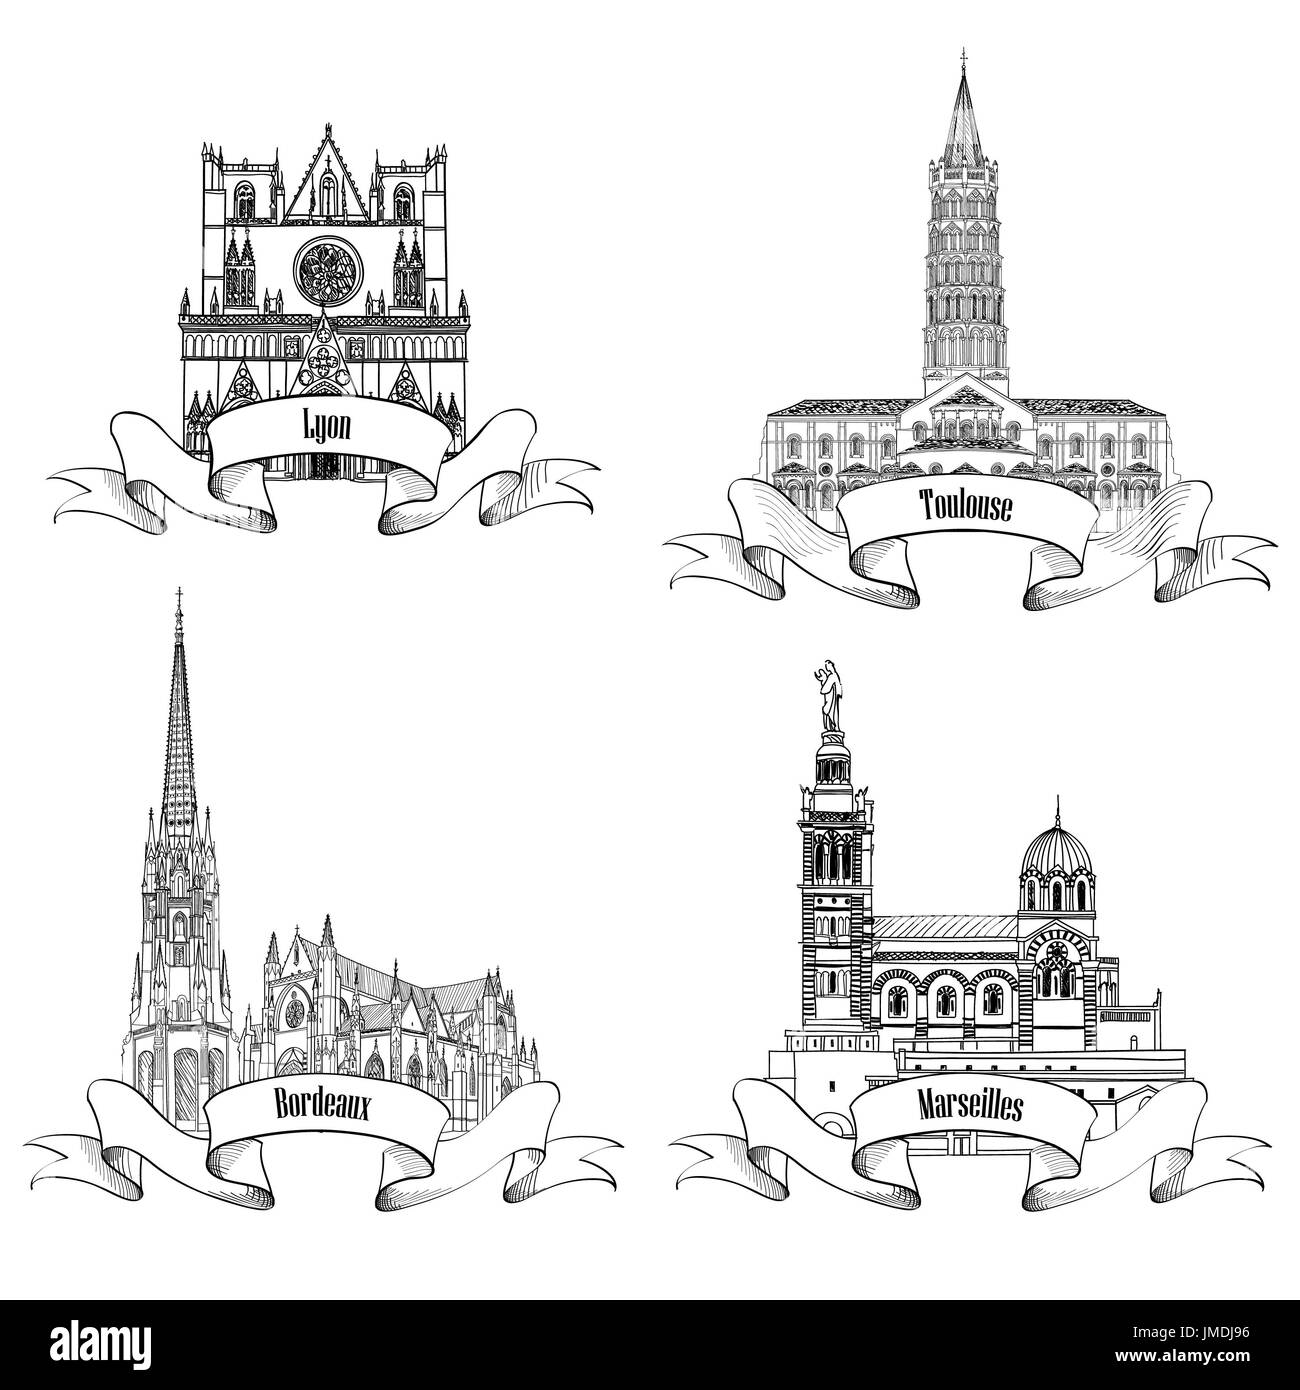 French famous buildings and landmarks. Hand drawn French city label set. Roman architecture. Travel France symbol collection. Bordeaux, Toulouse, Lyon Stock Photo